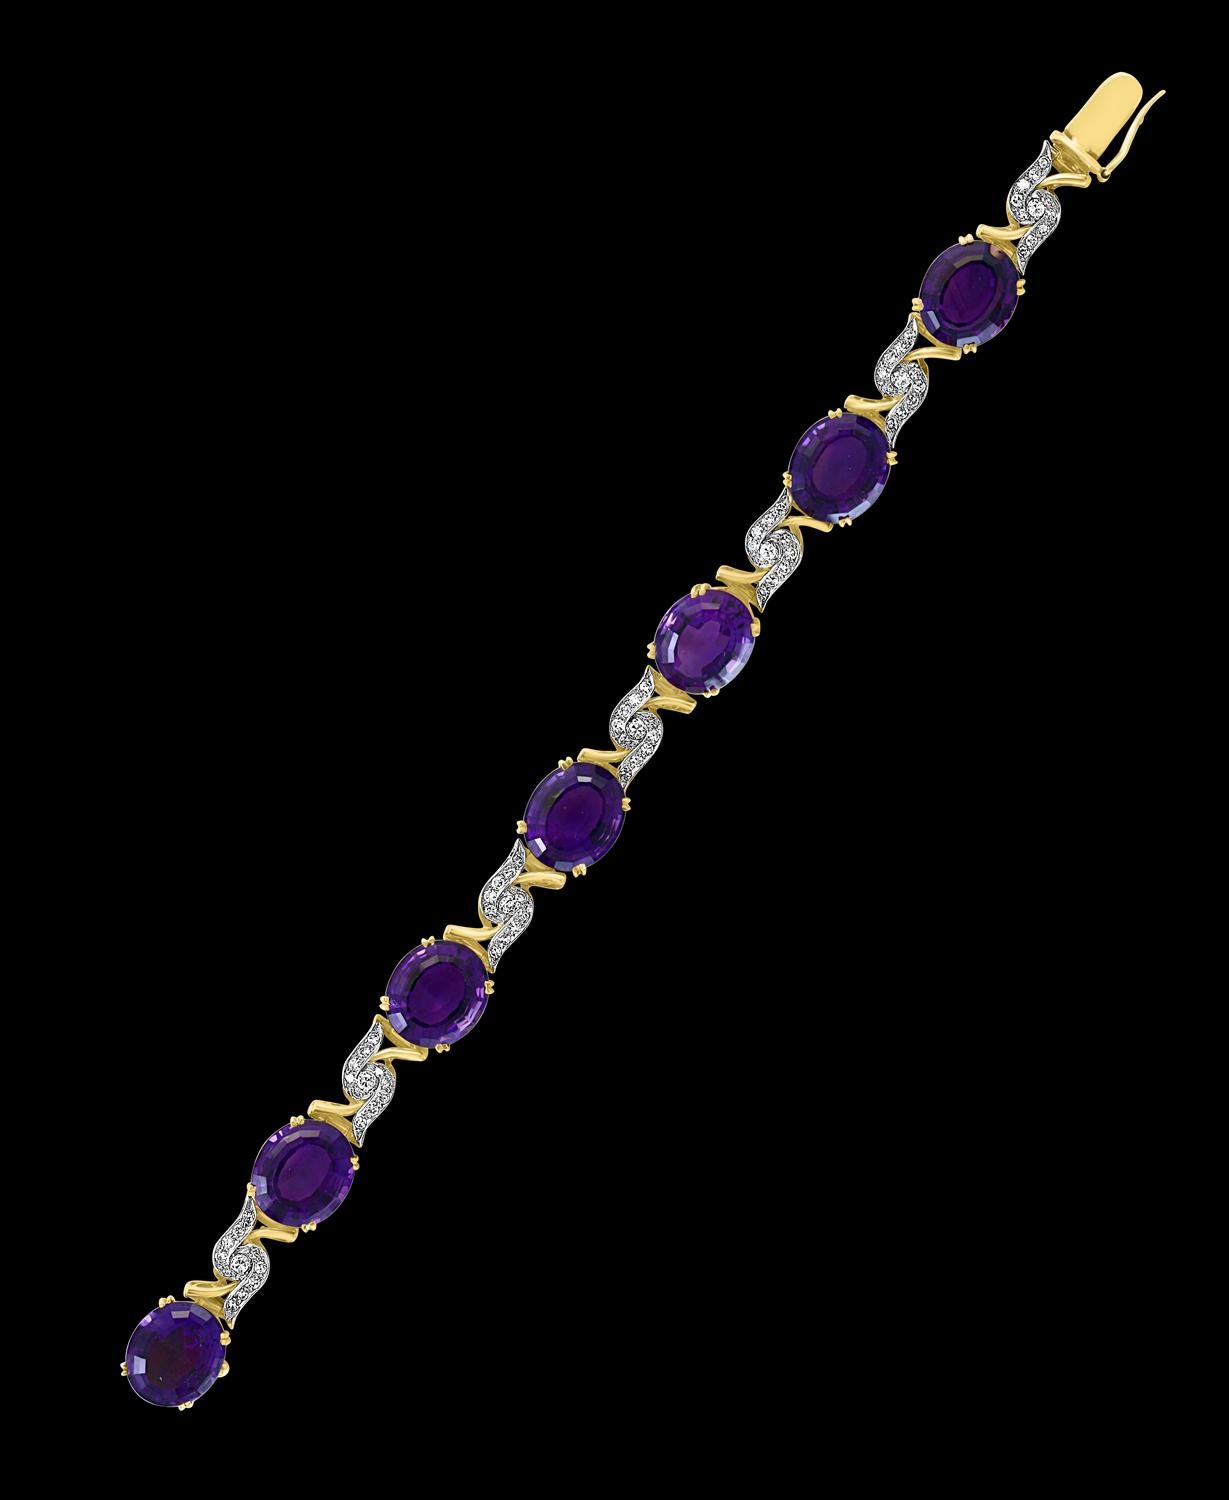 52 Carat  Oval shape Amethyst  And Diamond Bracelet In 18 Karat Yellow Gold 7.5 Inch
A spectacular jewelry piece.  This exceptional bracelet has 7  Oval shape Amethyst  stone . Weight of the Amethyst   is approximately 52 carats.The bracelet is